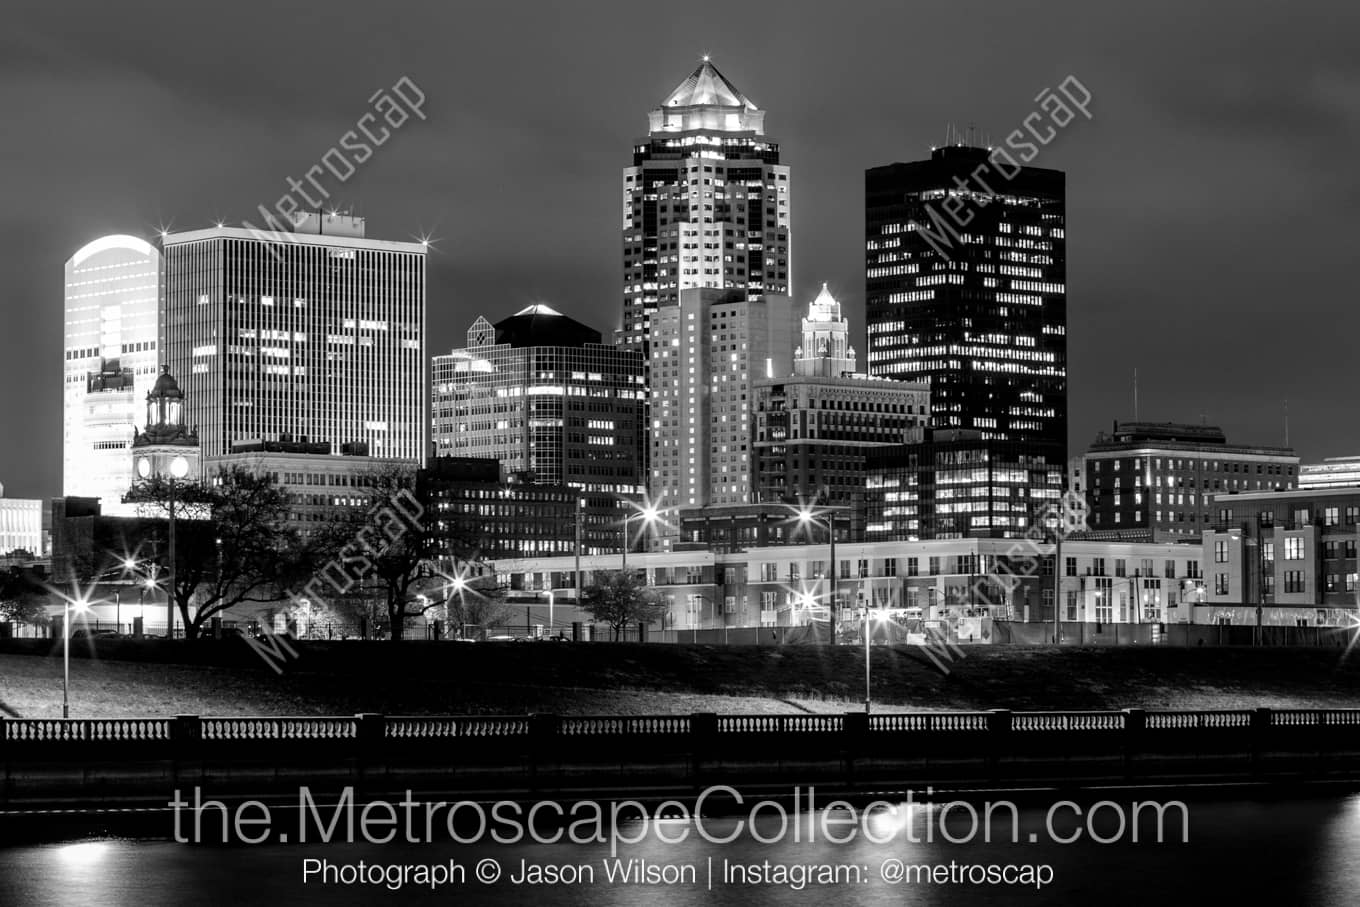 Des Moines Iowa Picture at Night